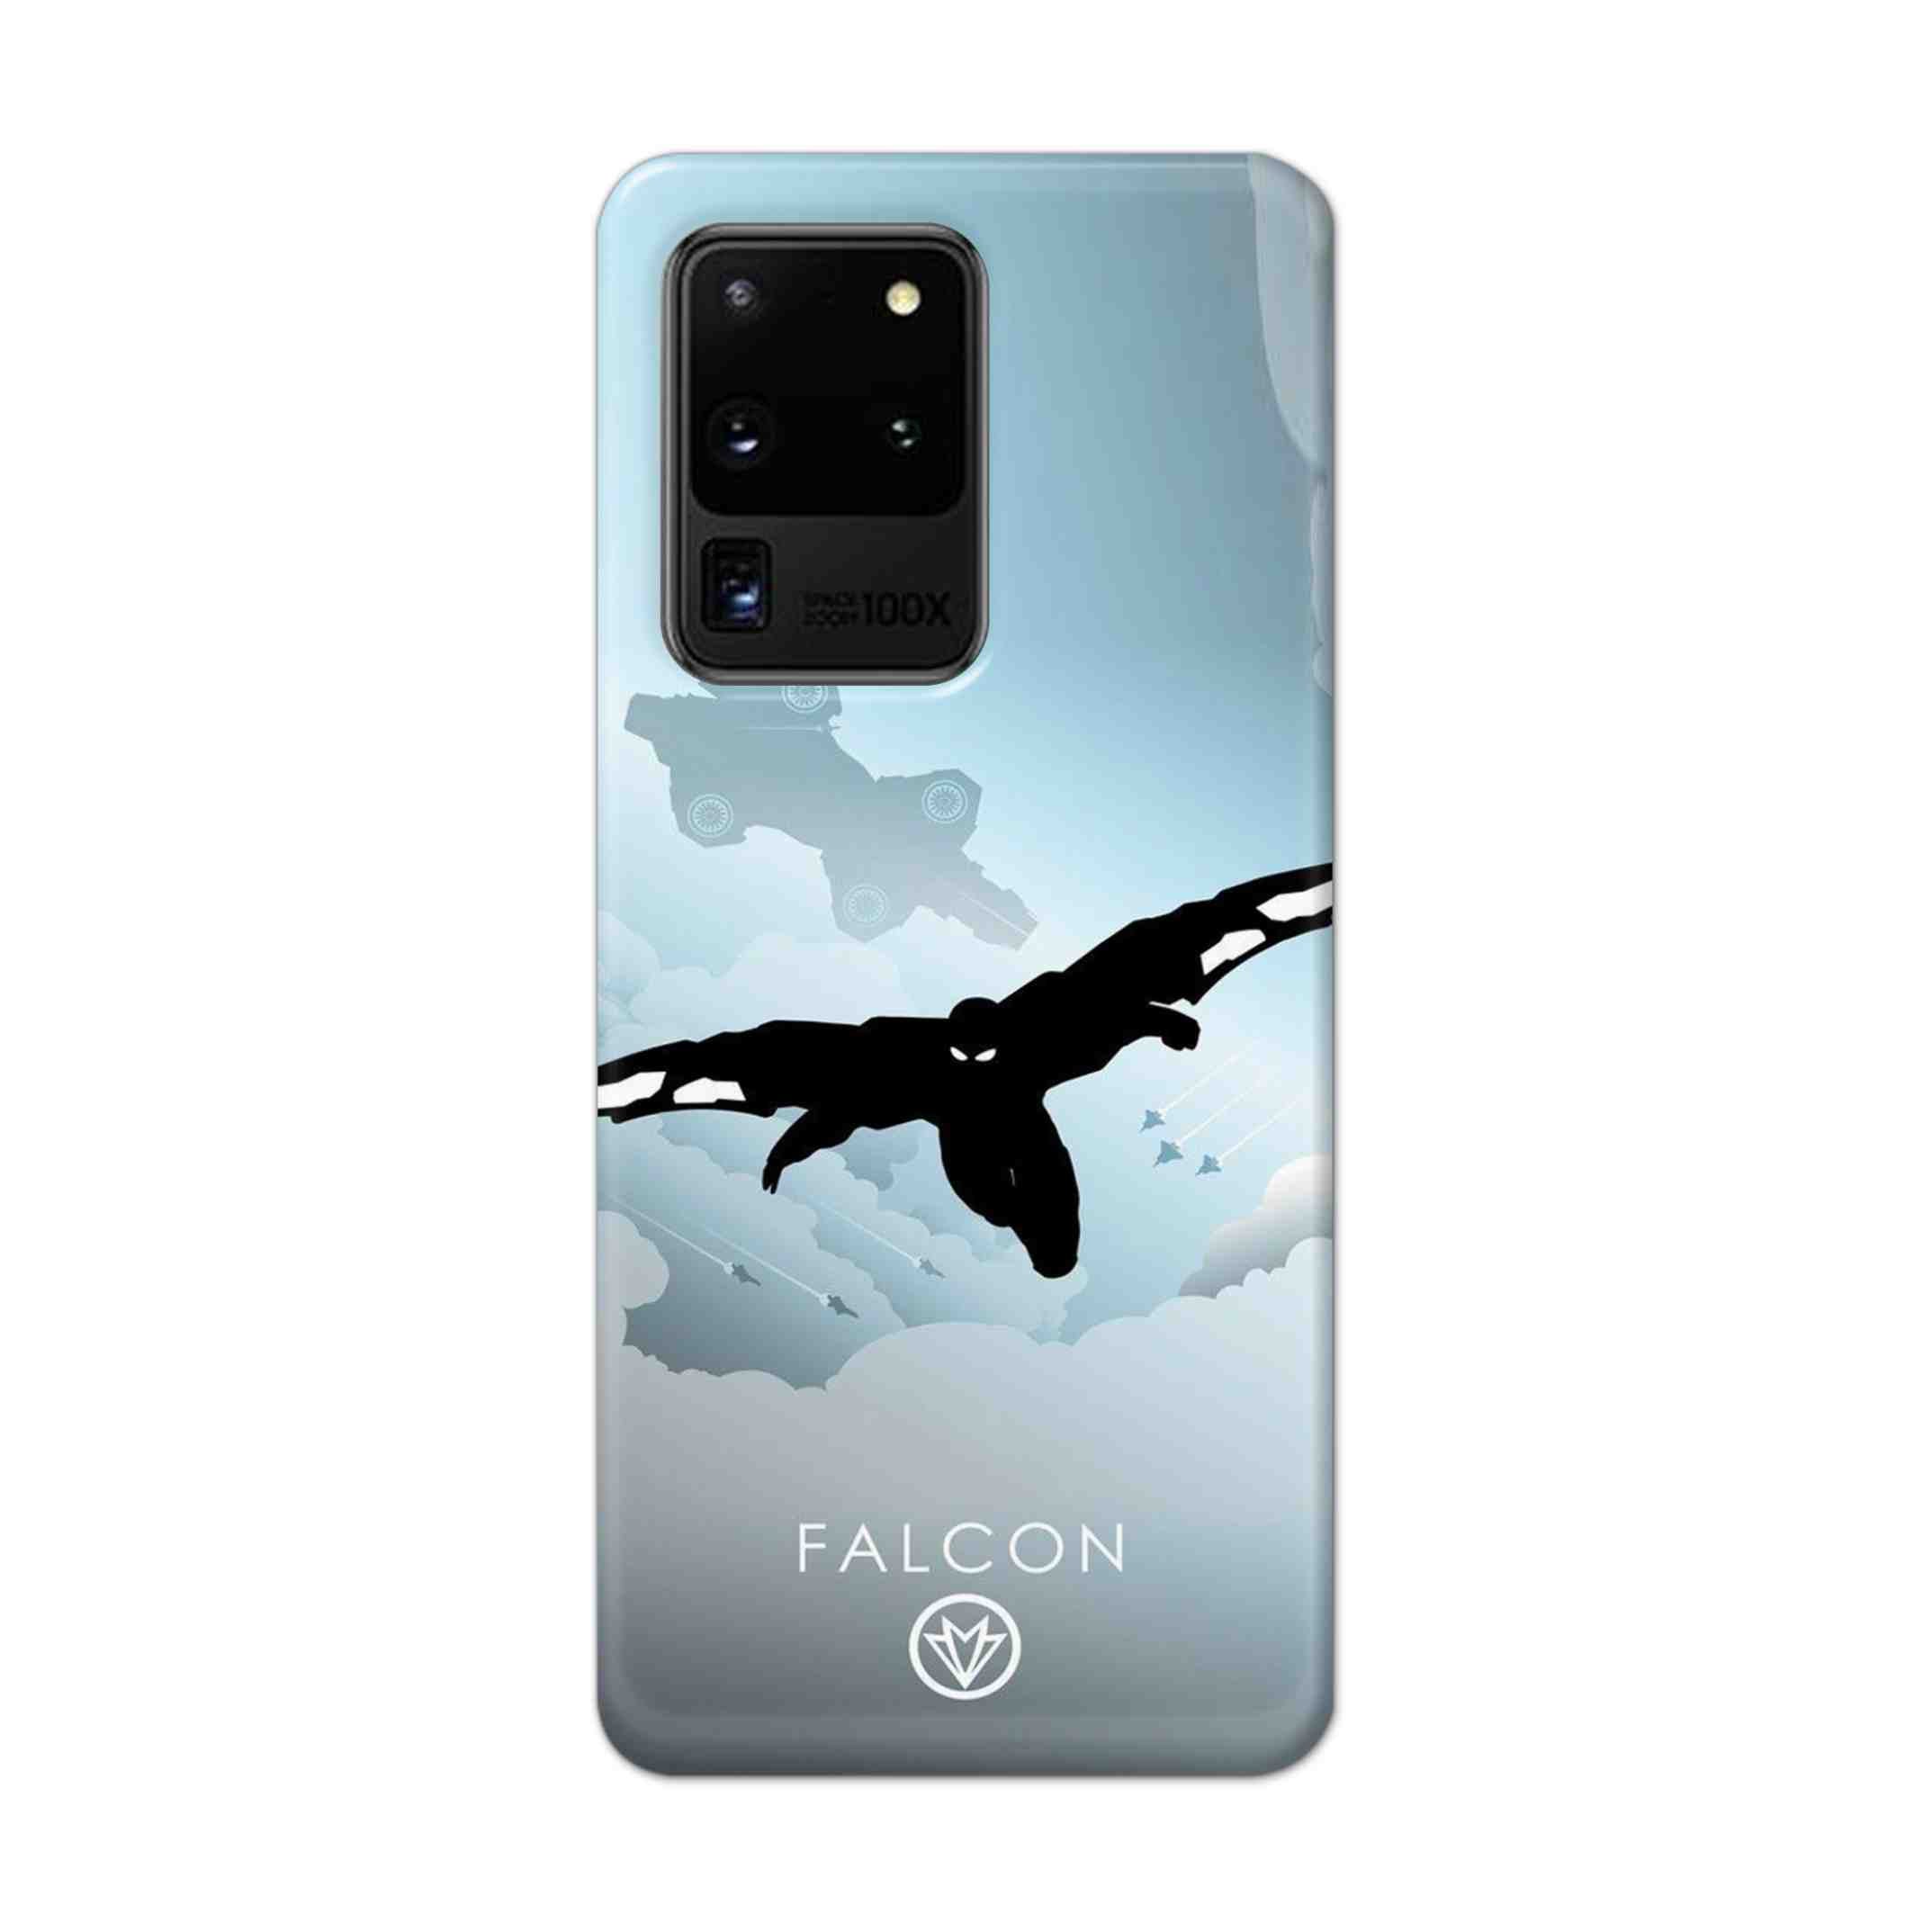 Buy Falcon Hard Back Mobile Phone Case Cover For Samsung Galaxy S20 Ultra Online